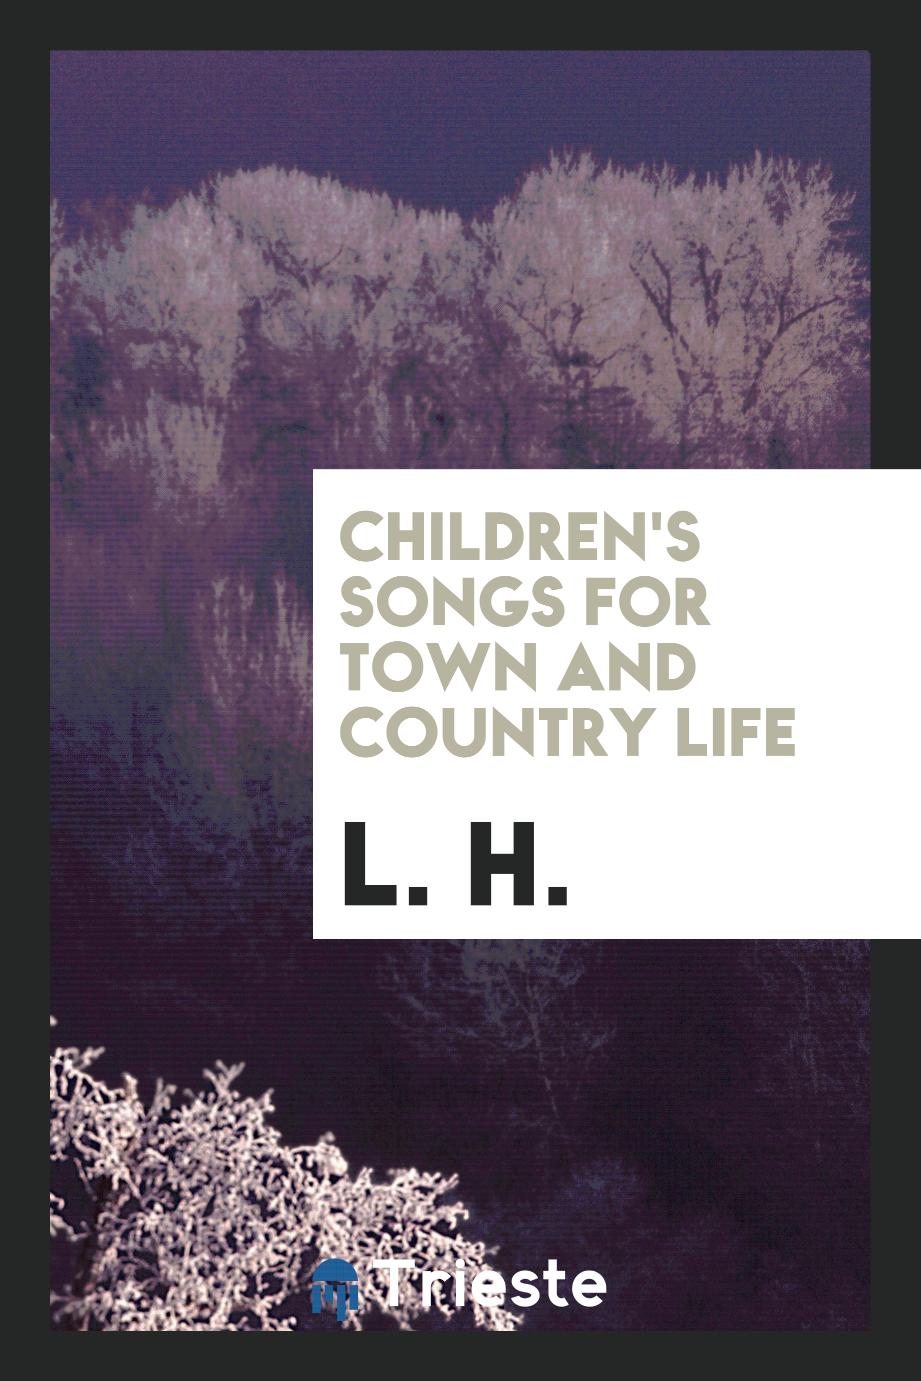 Children's songs for town and country life